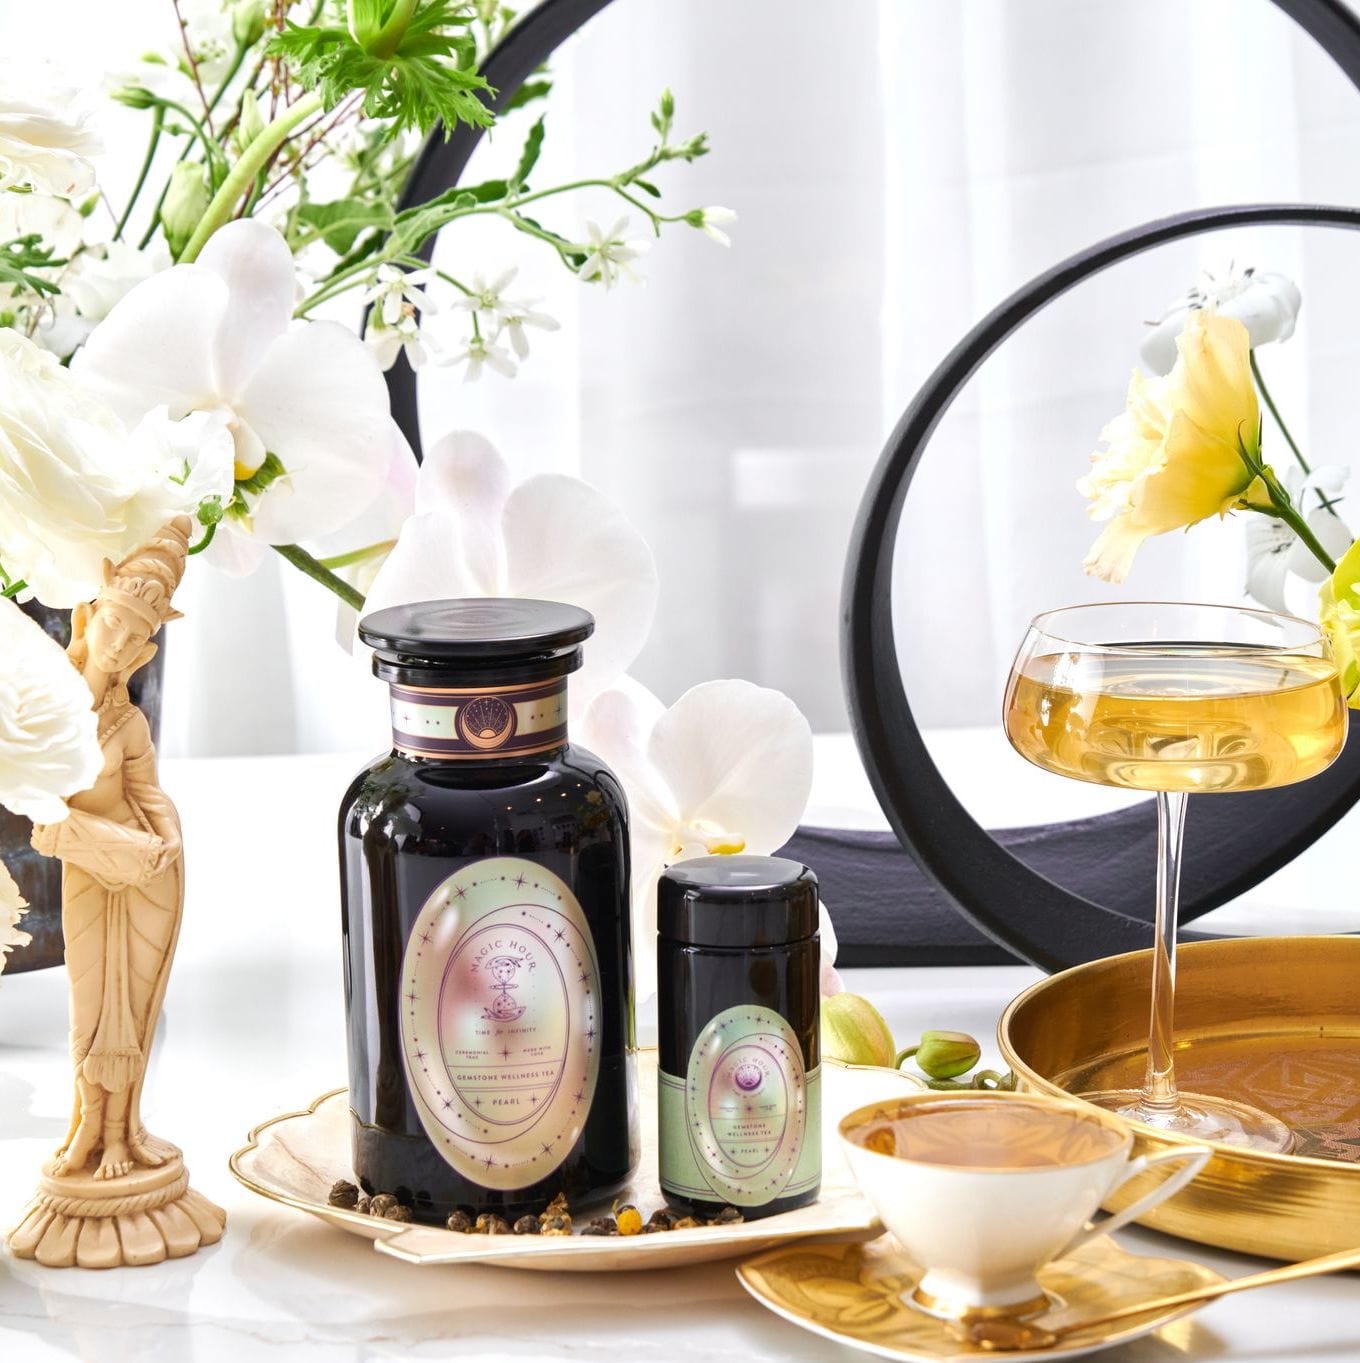 Elegant display featuring two black jars with pastel labels, a tall glass of golden liquid from Pearl Tea of Beauty, Clarity, and a Sense of Peace by Magic Hour, a gold saucer with a white cup, and delicate flowers in the background, including orchids. A small statue adds a touch of classical charm to the scene.